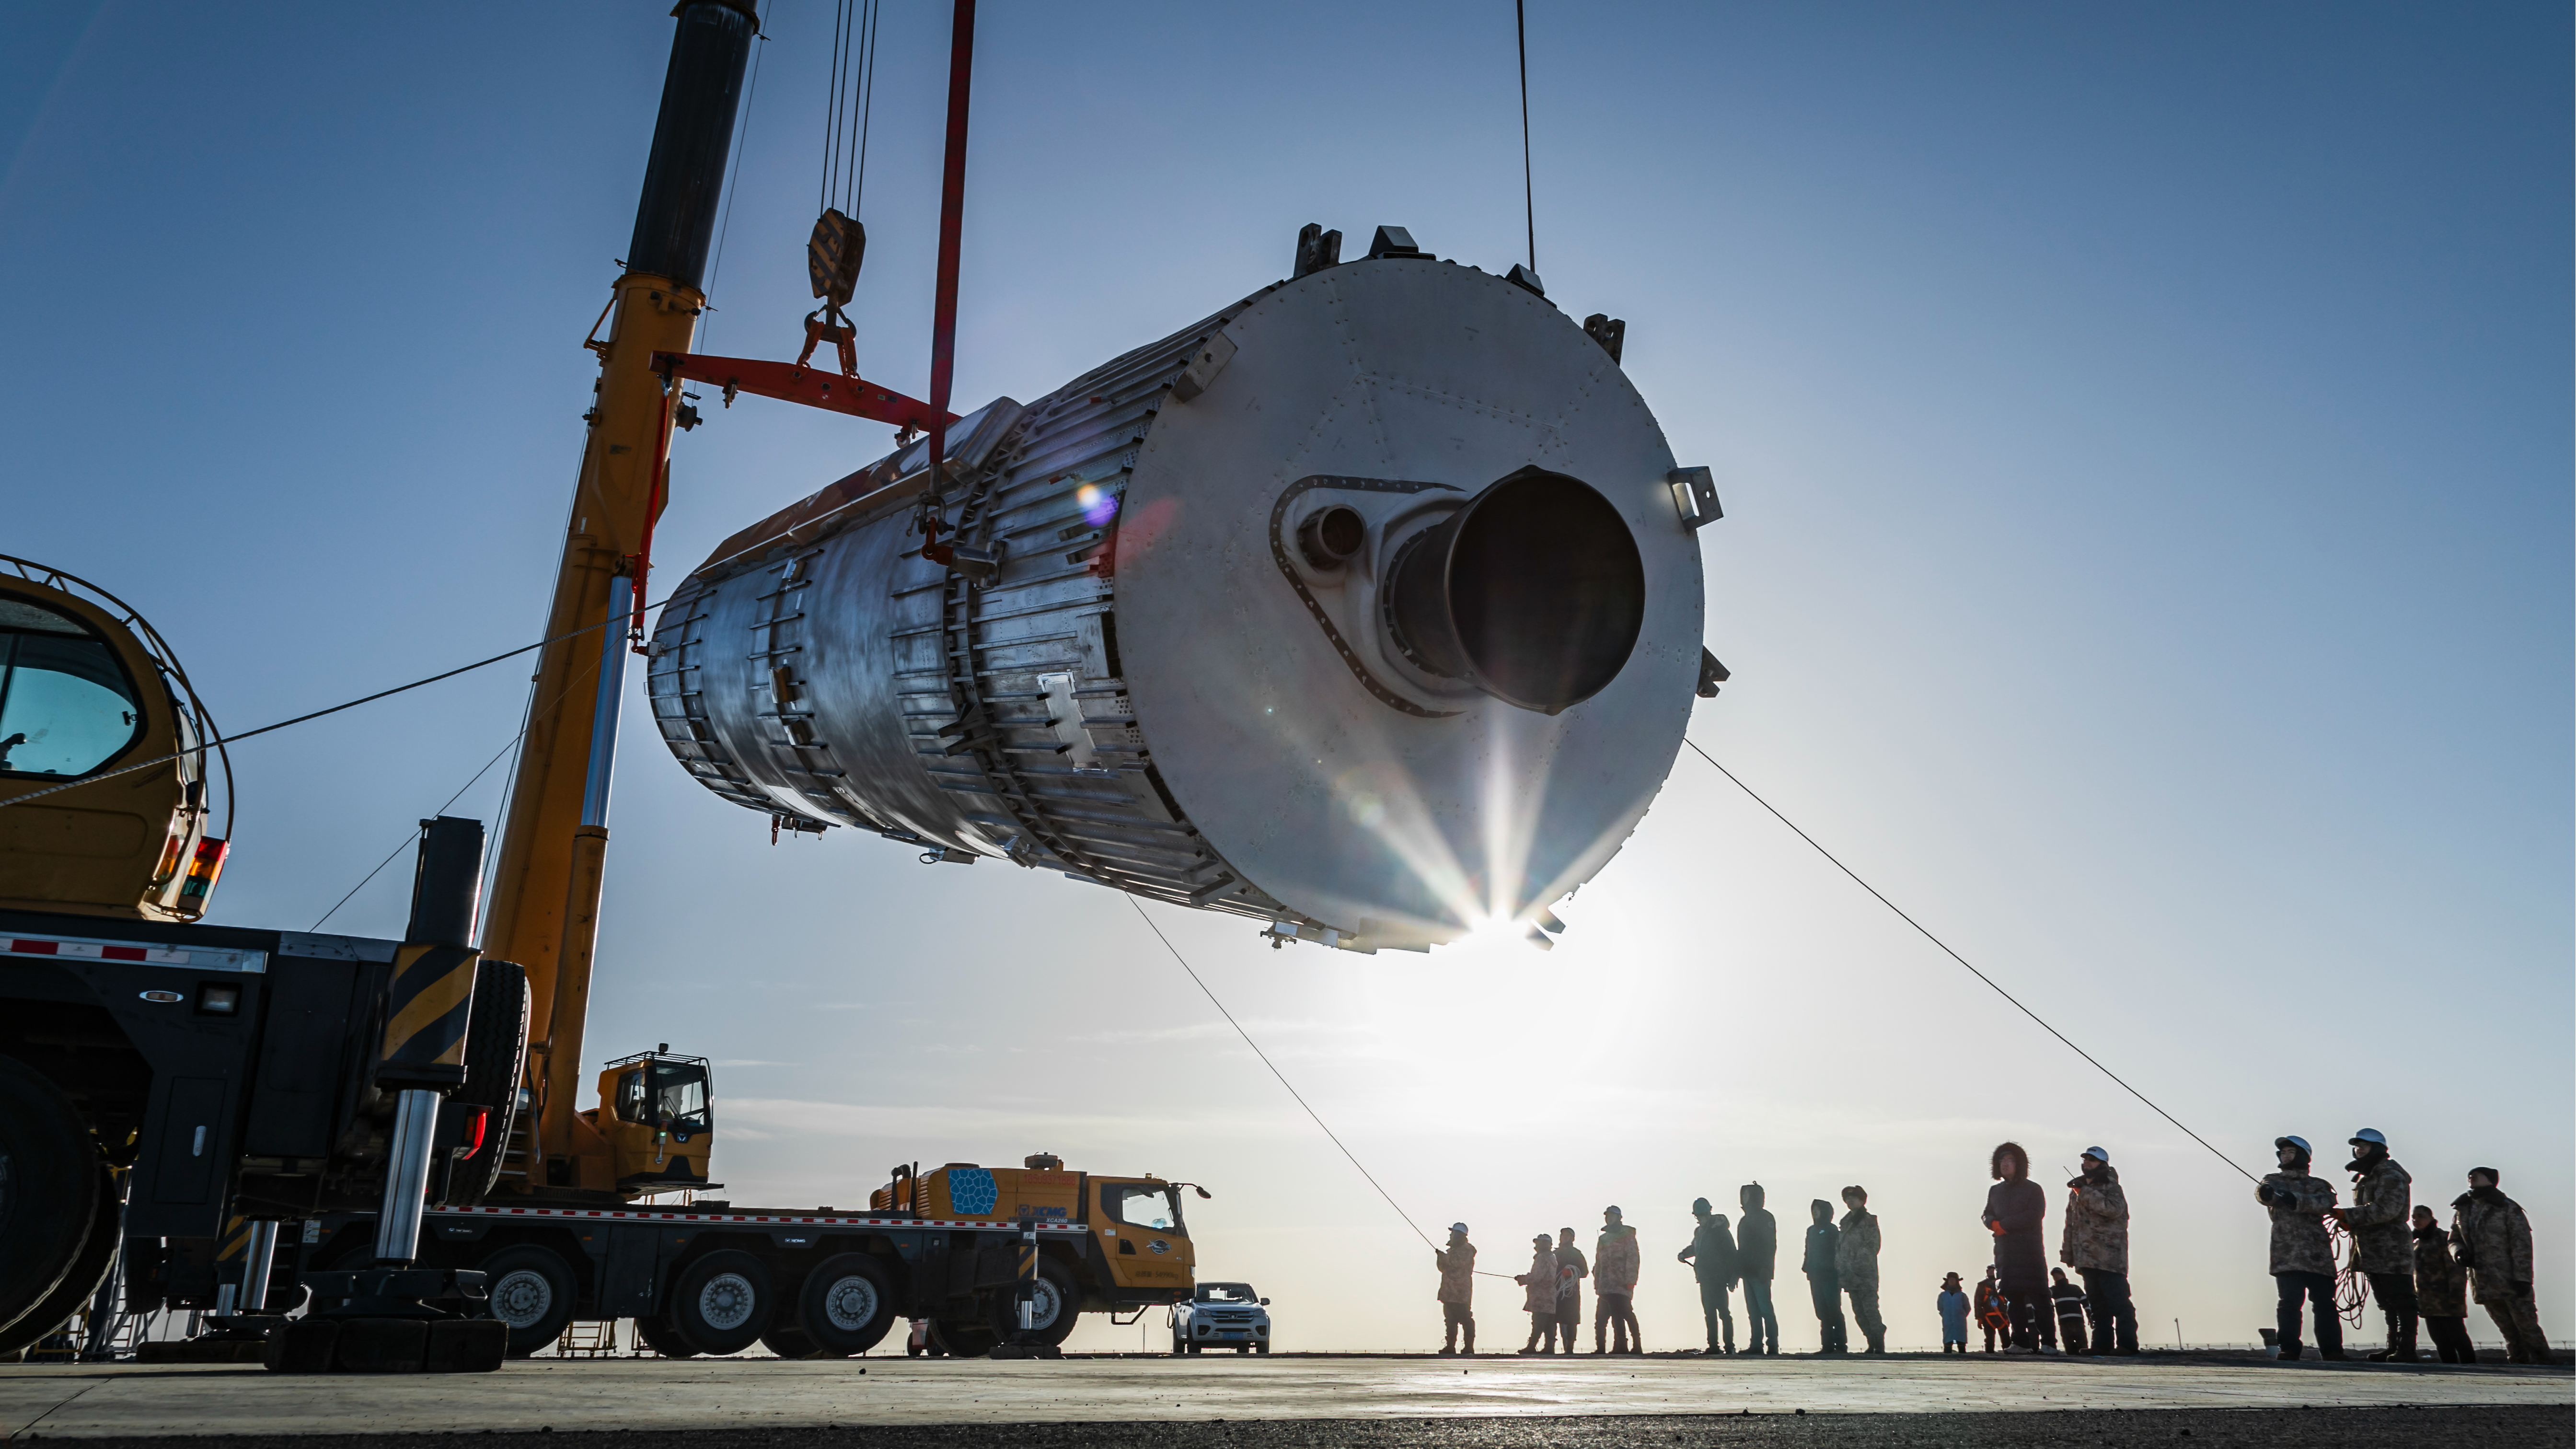 Zhuque-3 on its way to the launch site. /Photo by LandSpace